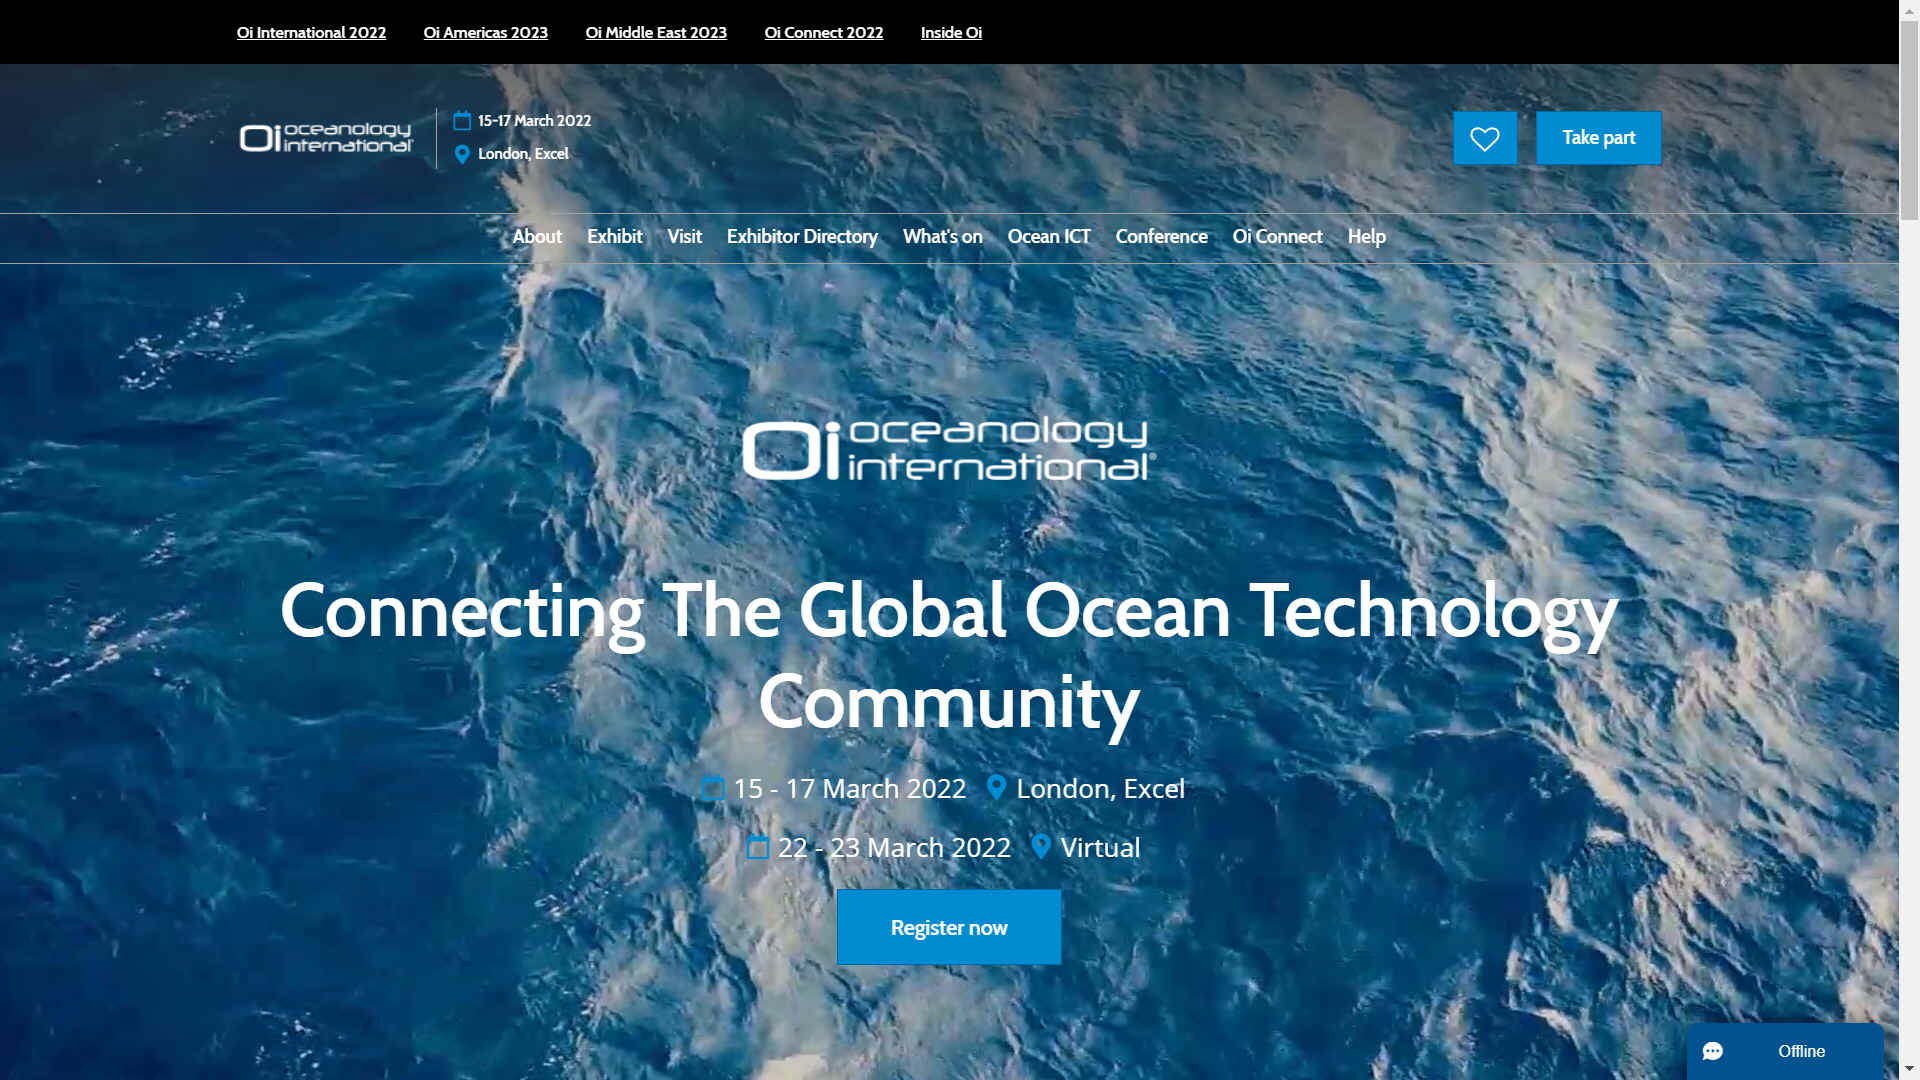 Oi connecting the global ocean technology community